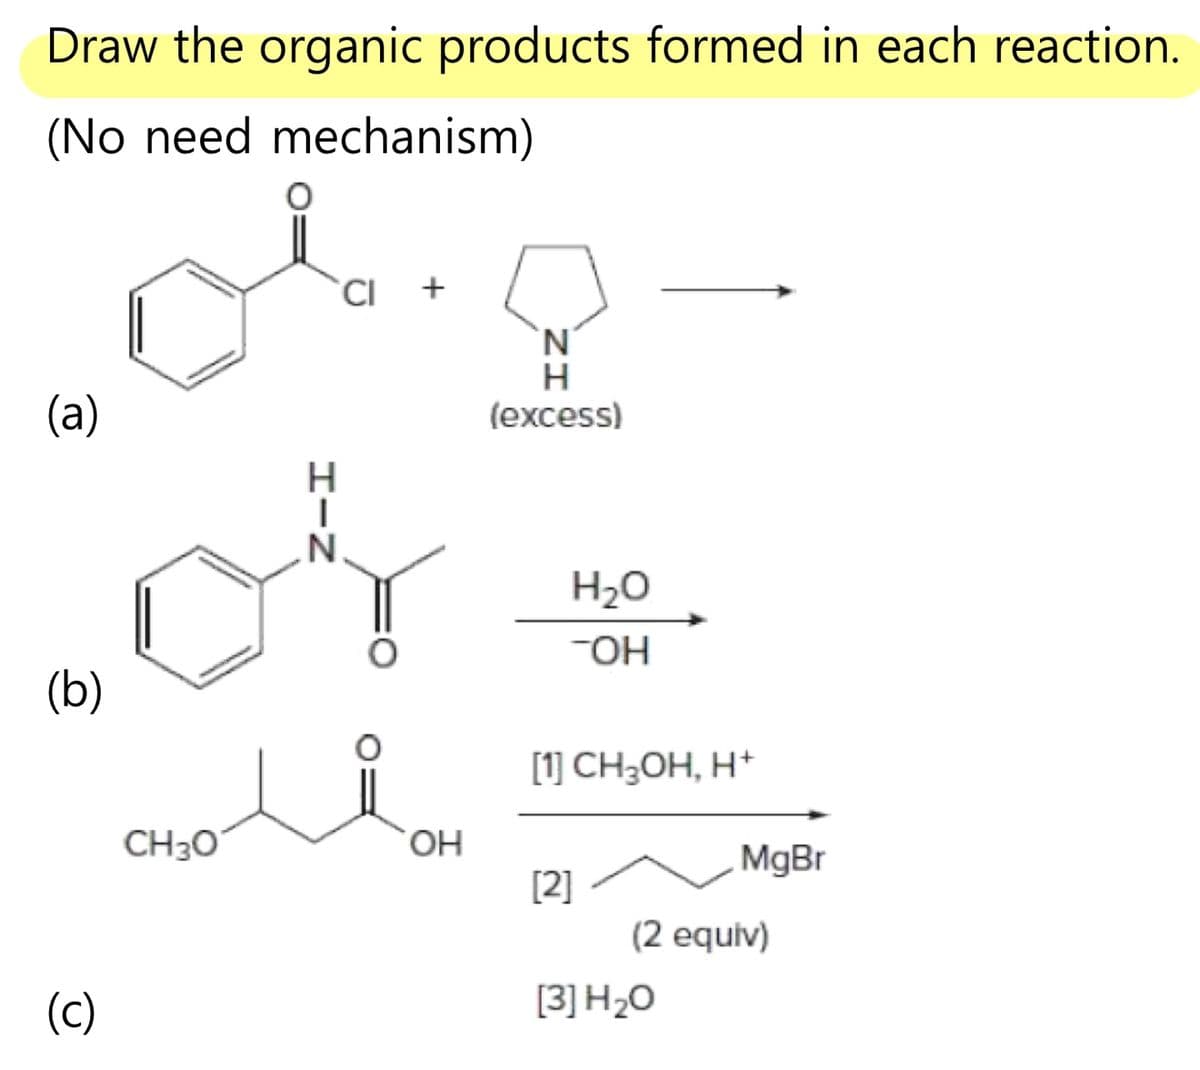 Draw the organic products formed in each reaction.
(No need mechanism)
(a)
(b)
(c)
CI +
or
CH3O
OH
N
H
(excess)
H₂O
-OH
[1] CH₂OH, H+
[2]
MgBr
(2 equiv)
[3] H₂O